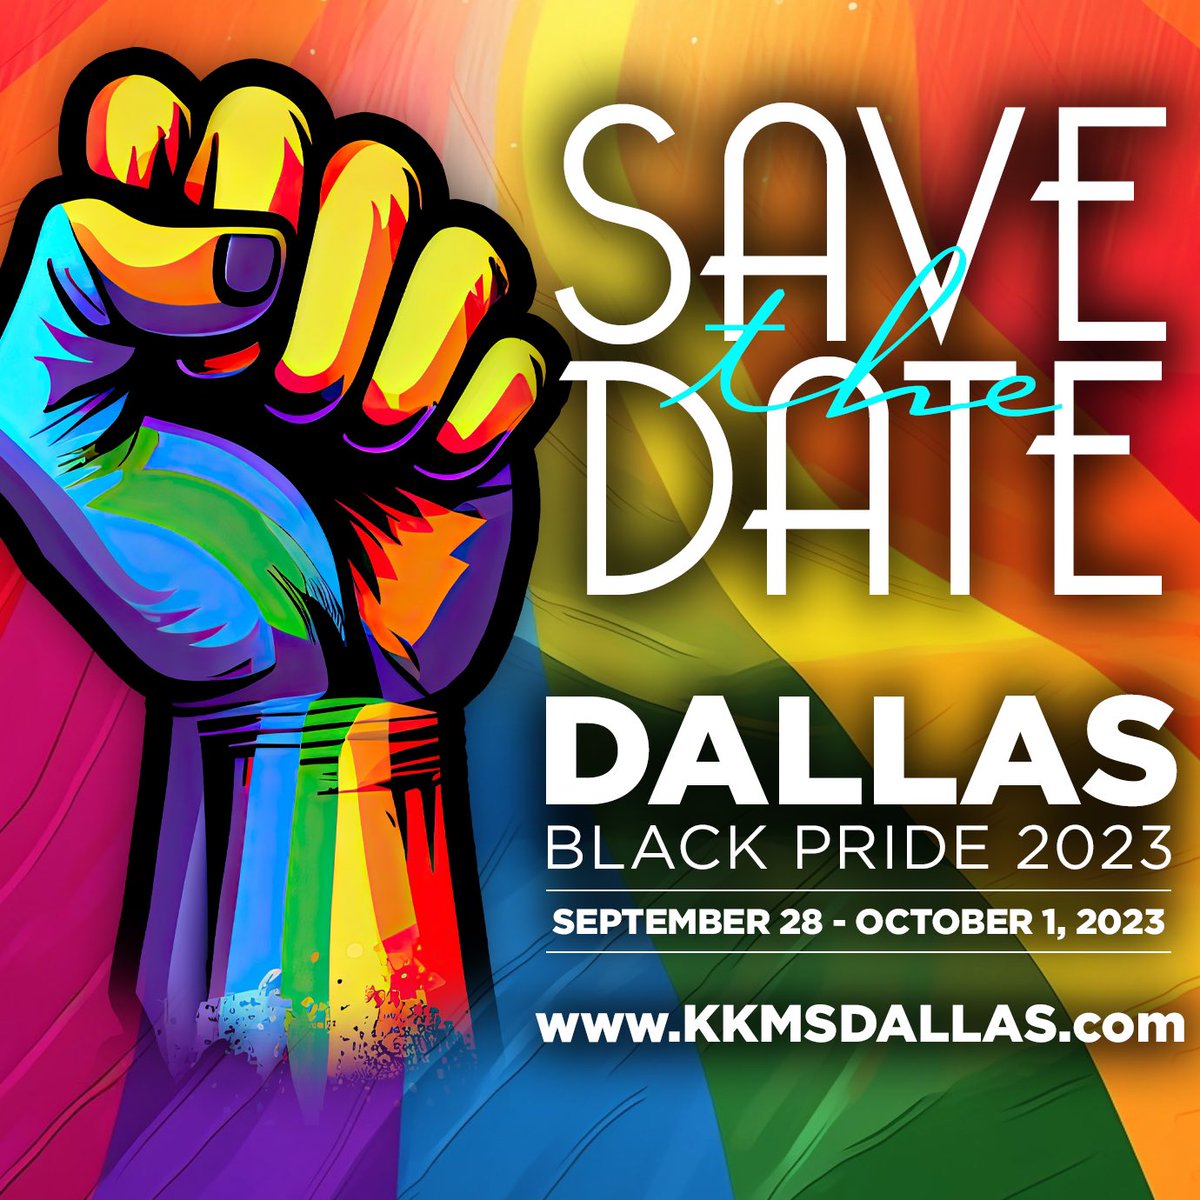 Join The Distinguished Gentlemen of @kkms2k for The Heat Experience for Dallas Urban Pride 2023. 

September 28 -October 1, 2023 
More Details and information on all weekend events coming HERE soon.

#kkms #TheDistinguishedGents #HeatDallas #dallasurbanpride2023